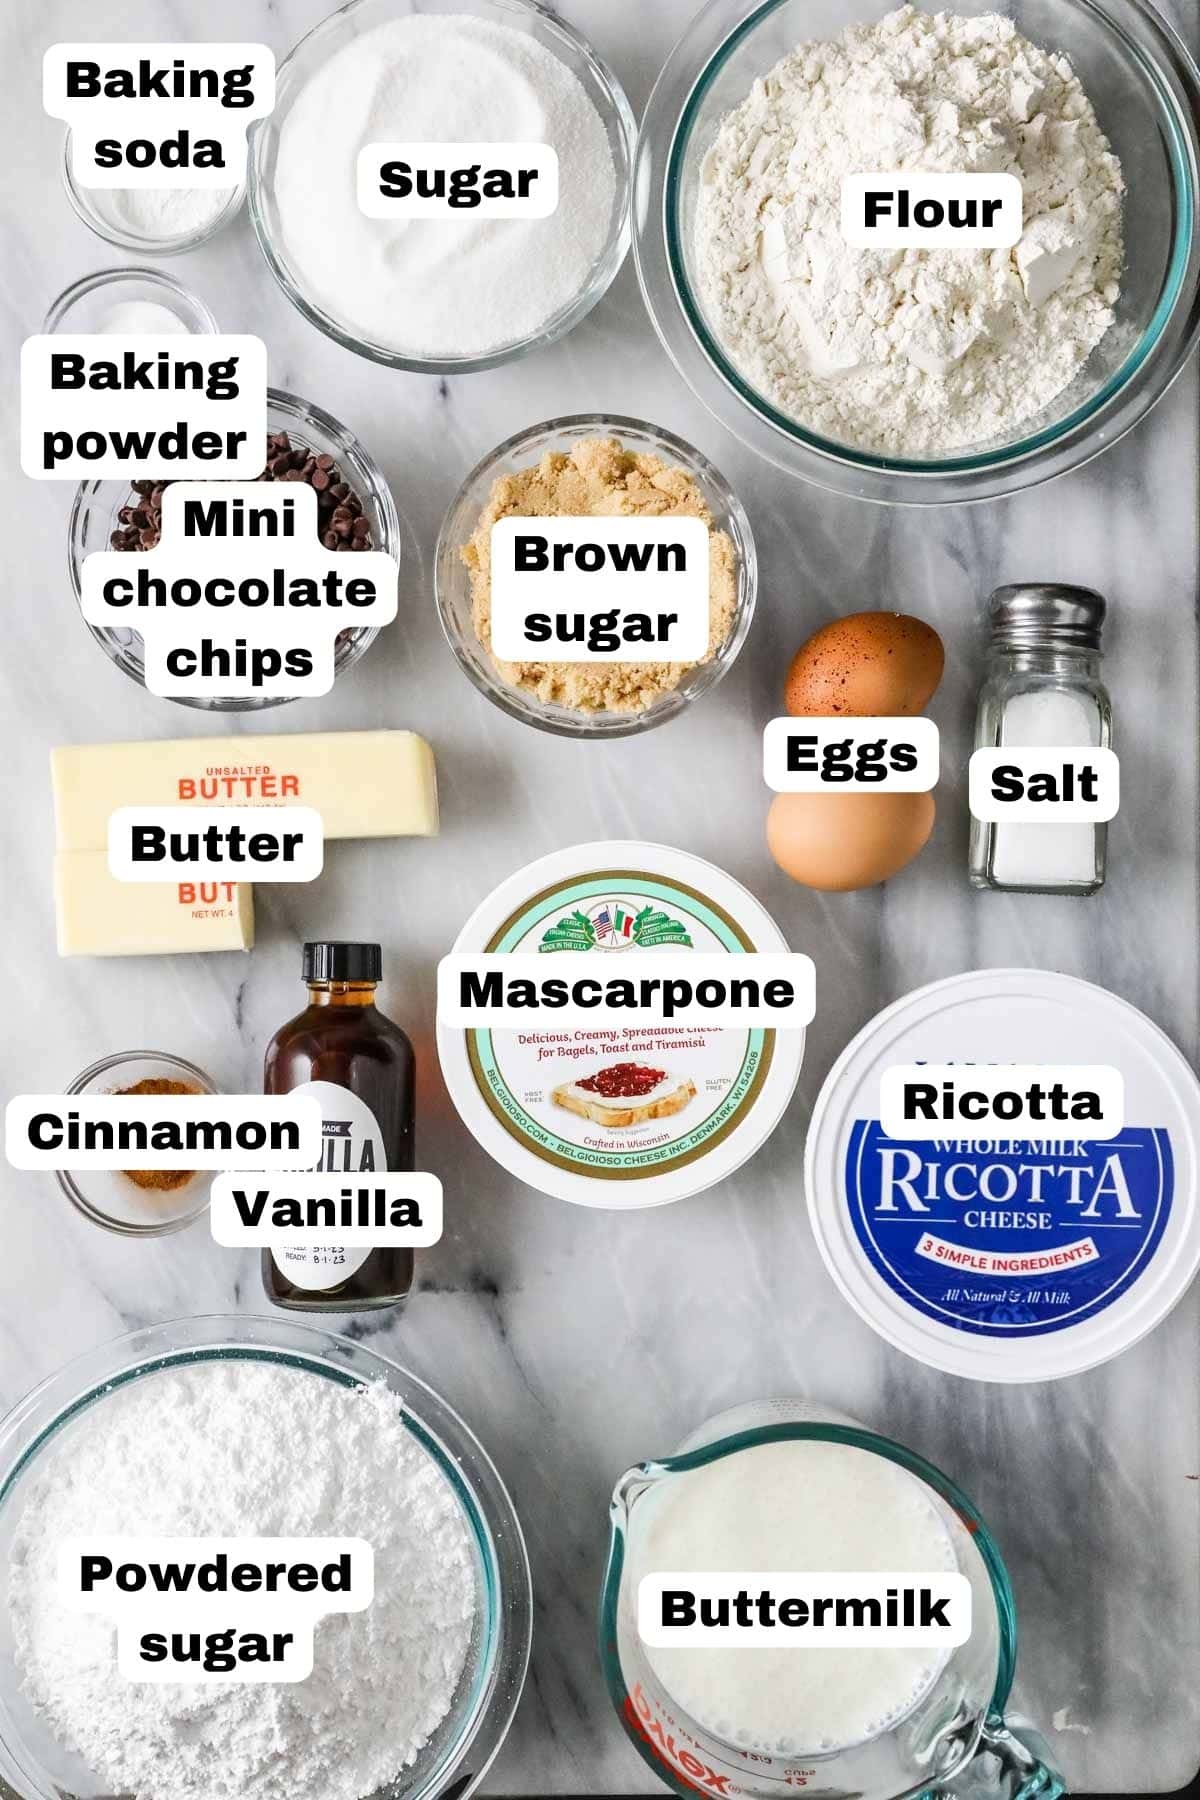 Overhead view of labelled ingredients including mascarpone, ricotta, cinnamon, and more.